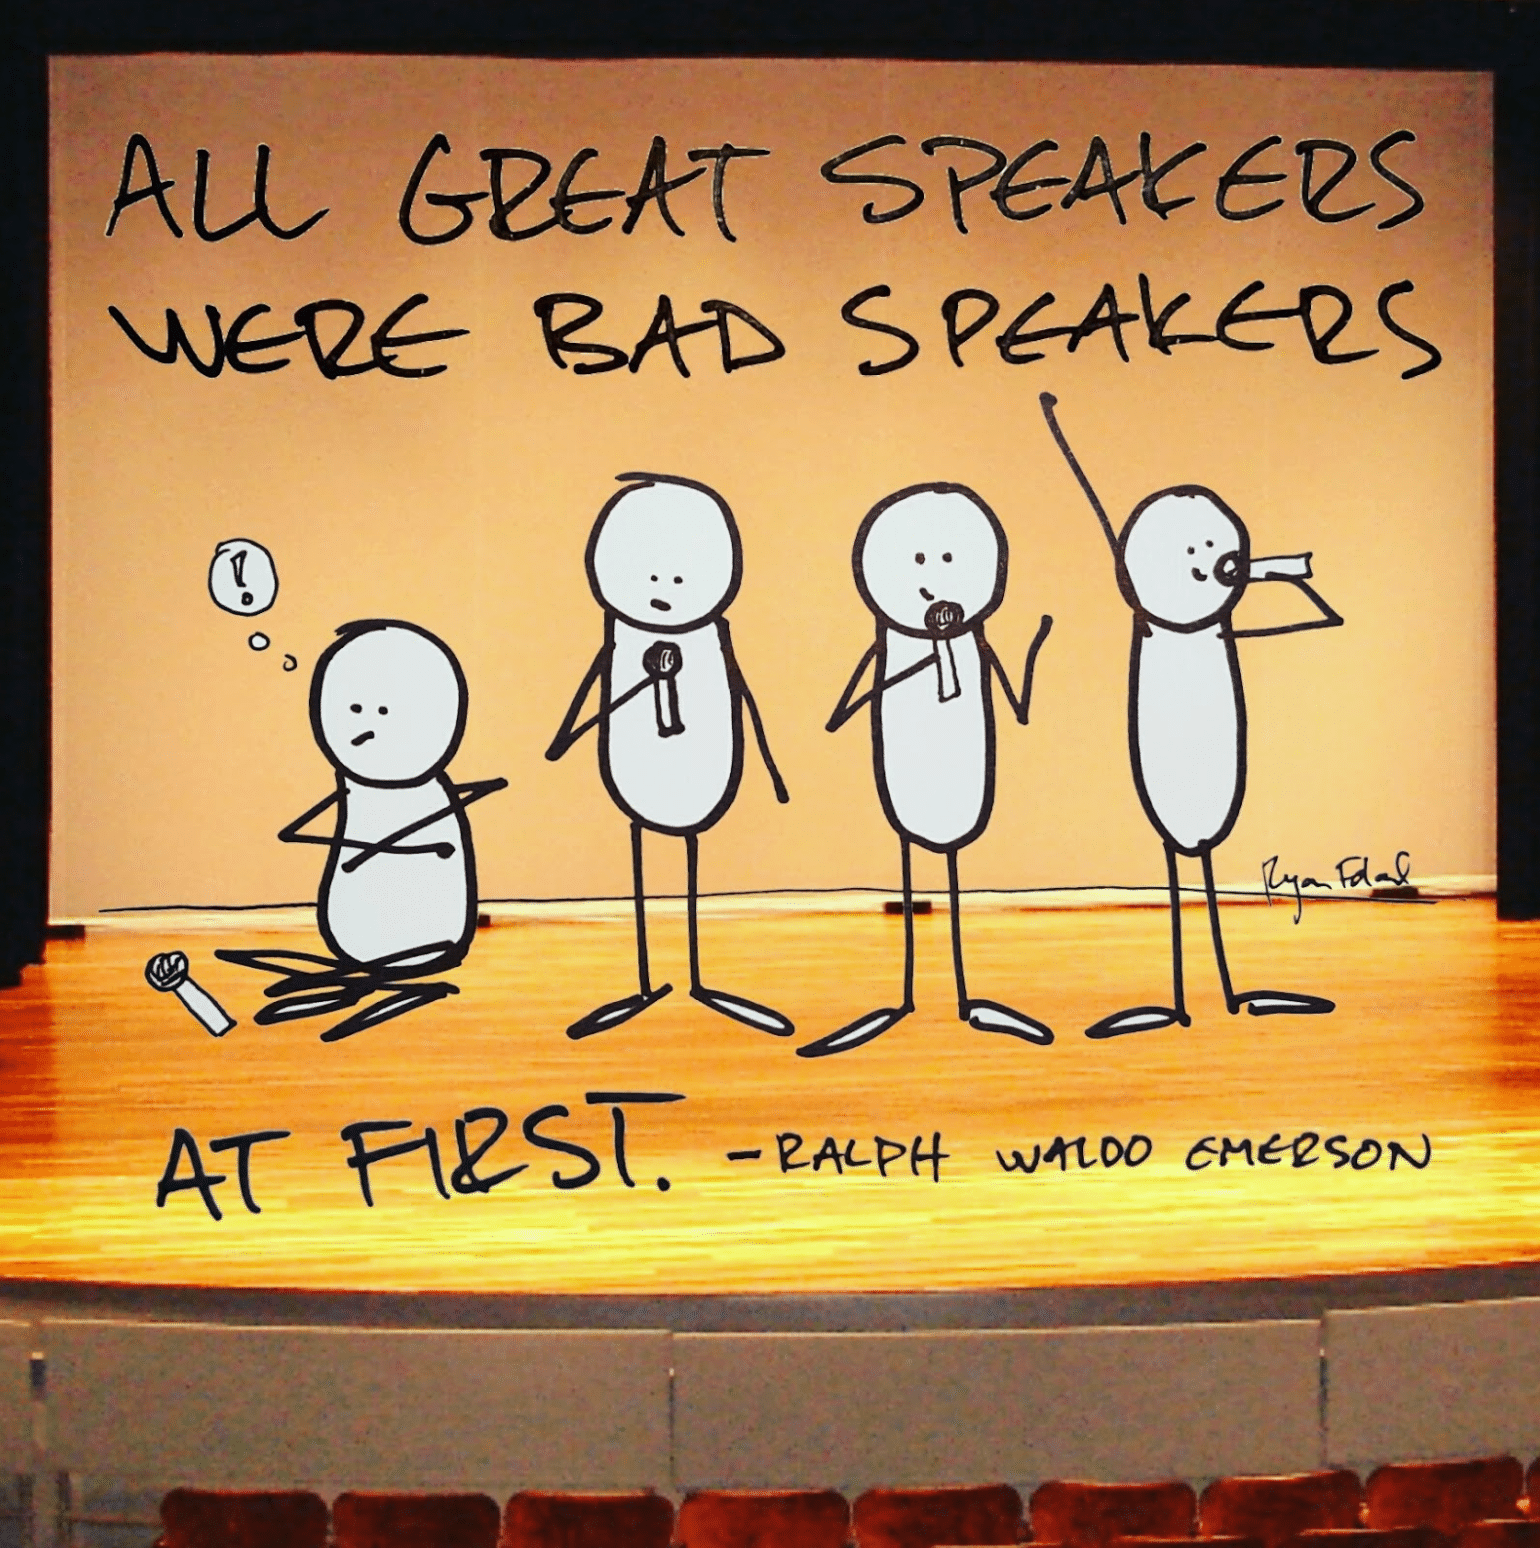 All great speakers were bad speakers at first, quote by Ralph Waldo Emerson.